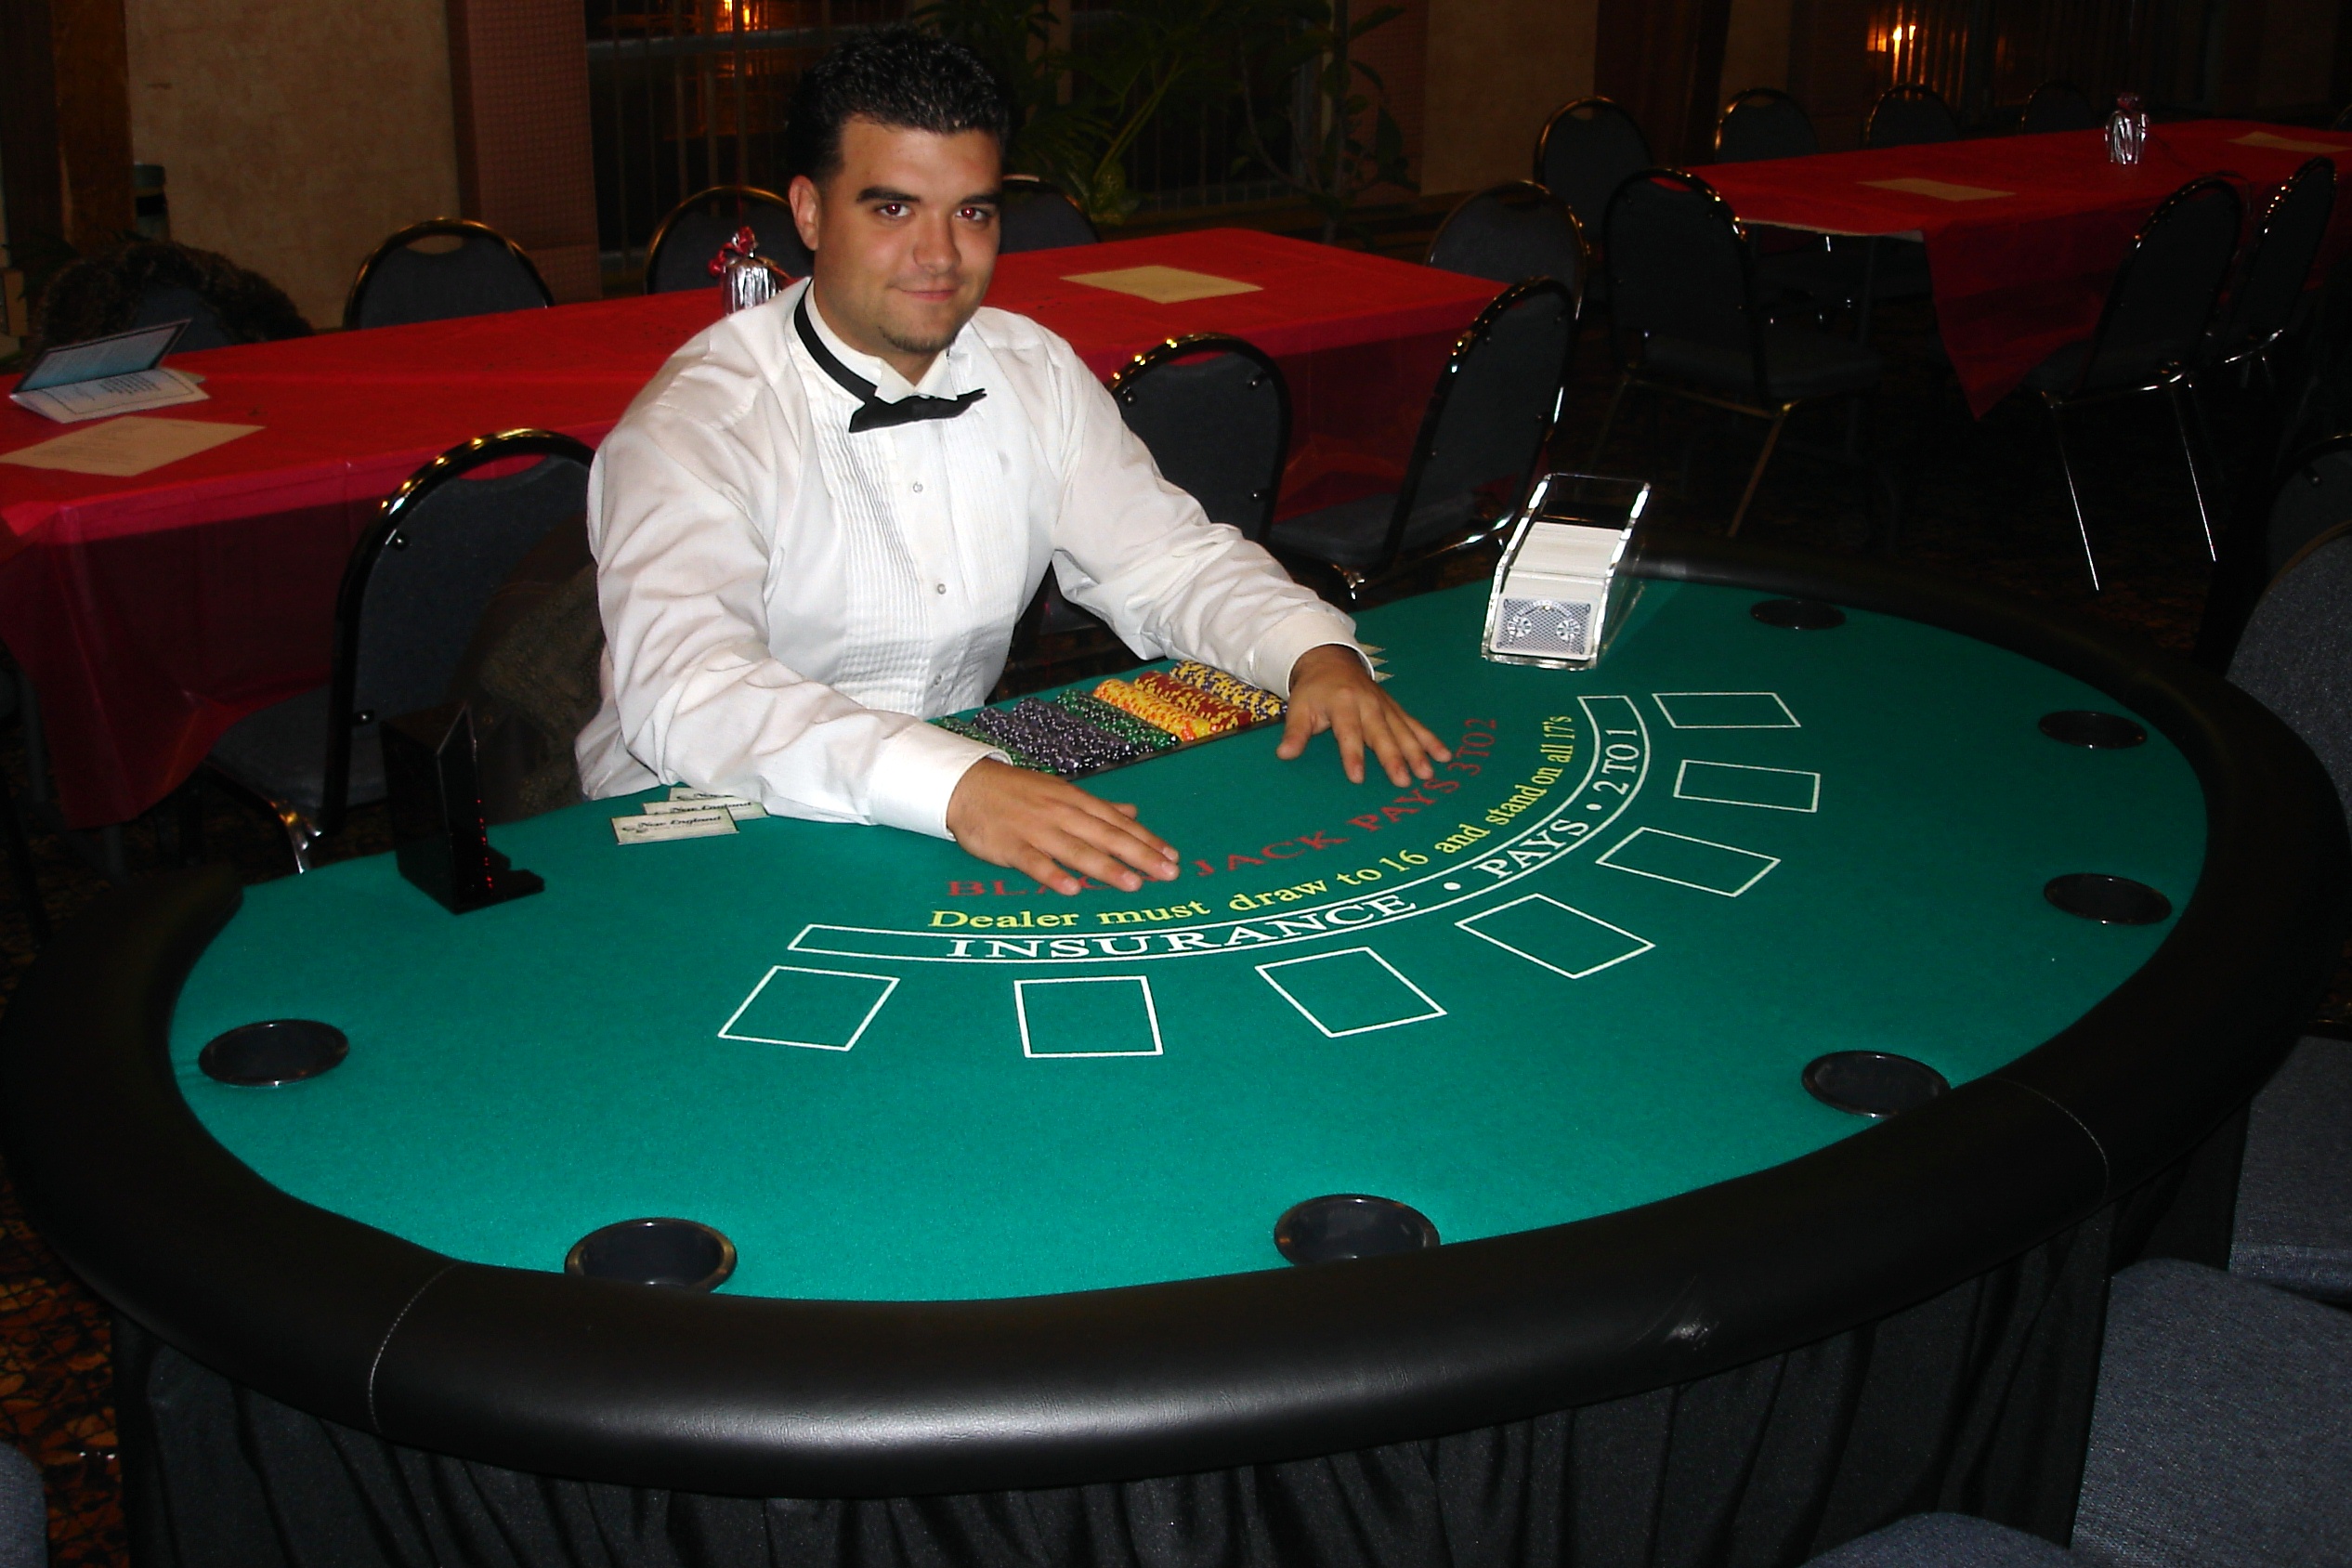 Blackjack is one of the most popular casino games in the world. Our